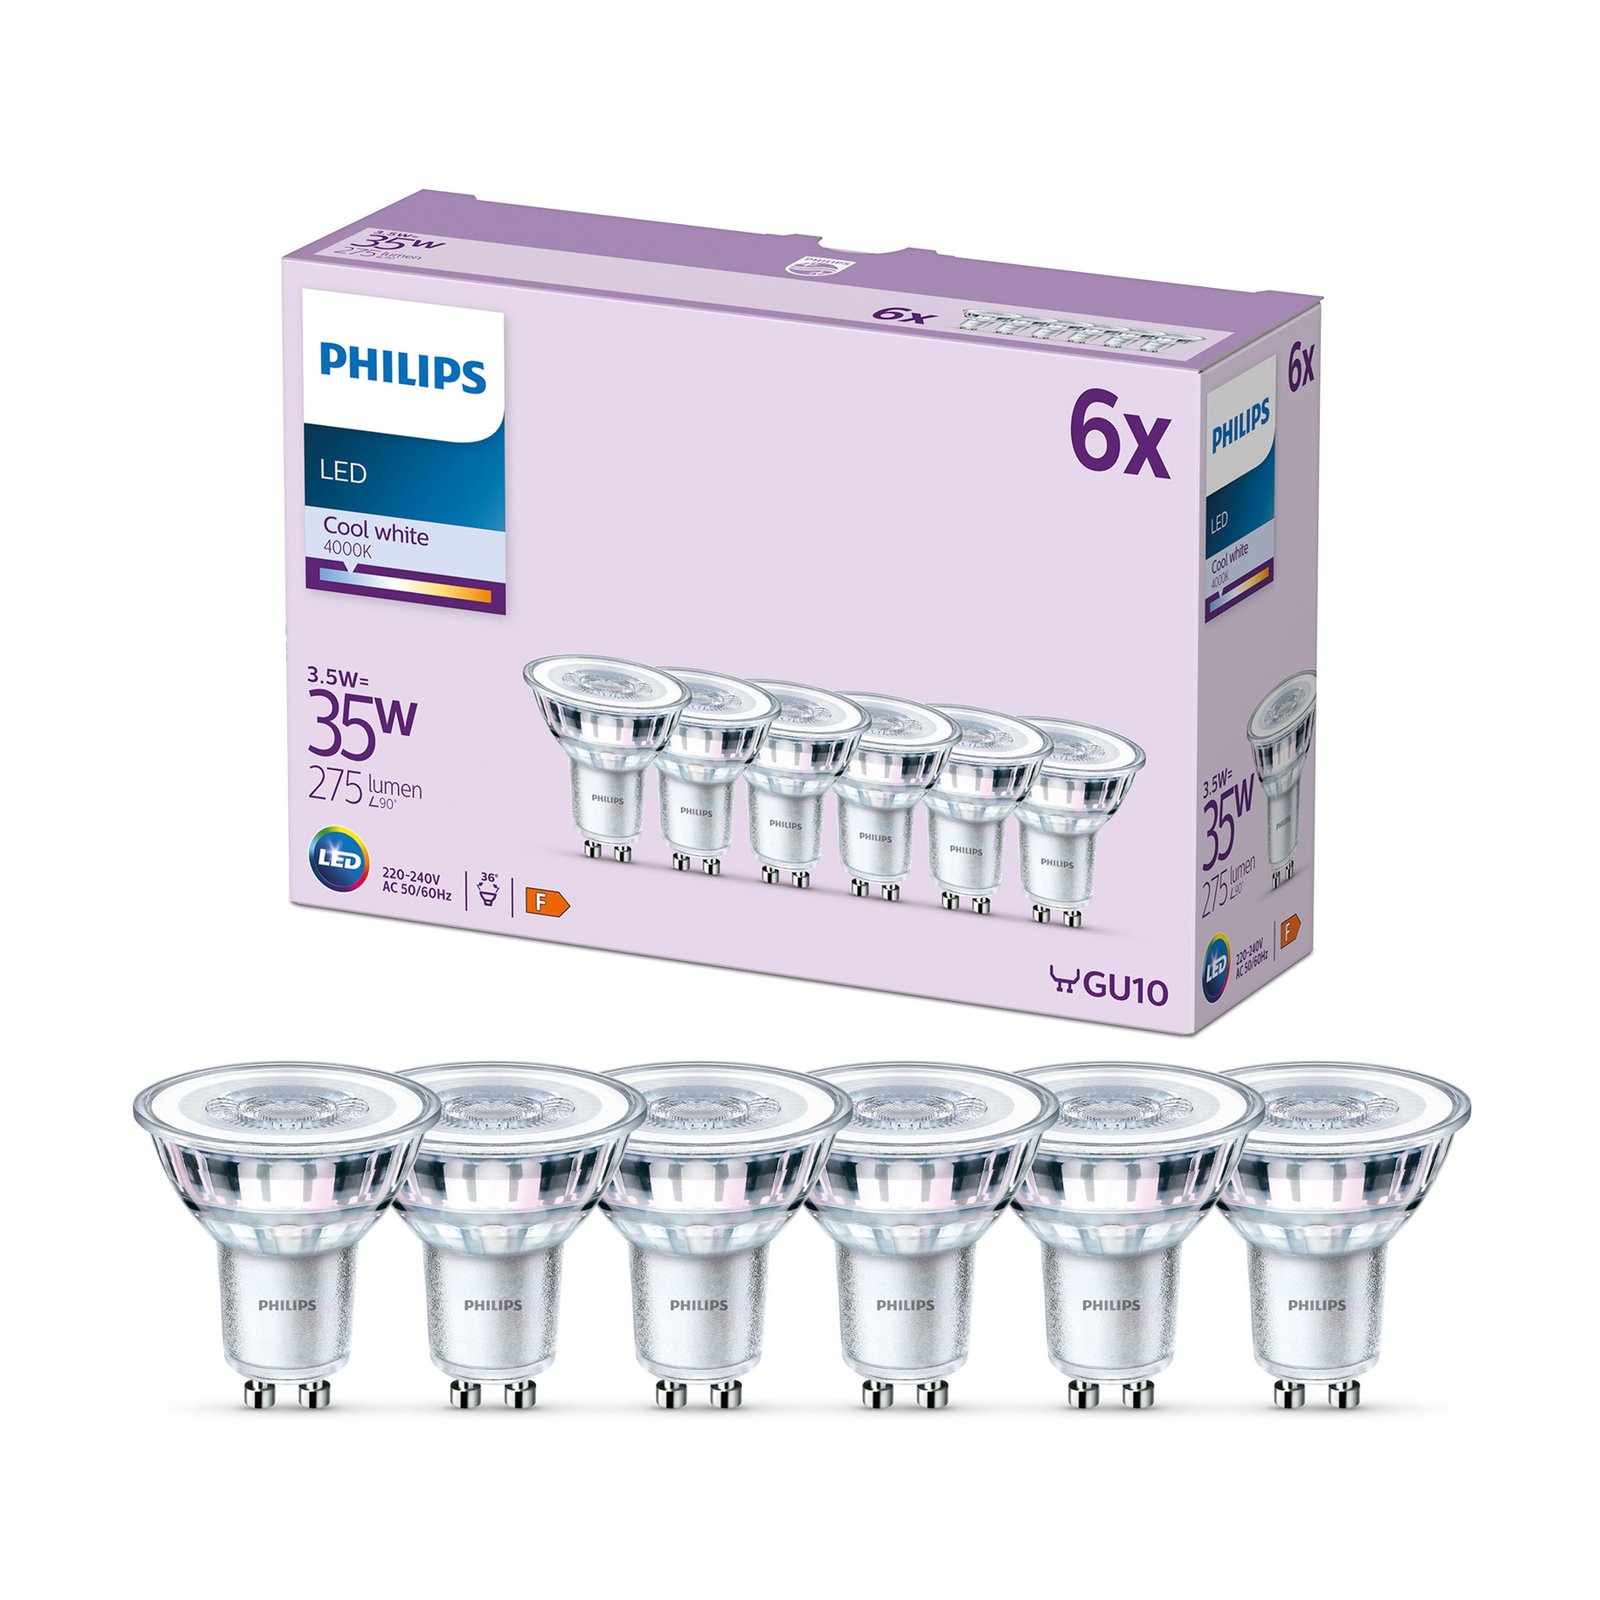 Philips LED GU10 3,5 W 275 lm 840 claire 36° x6